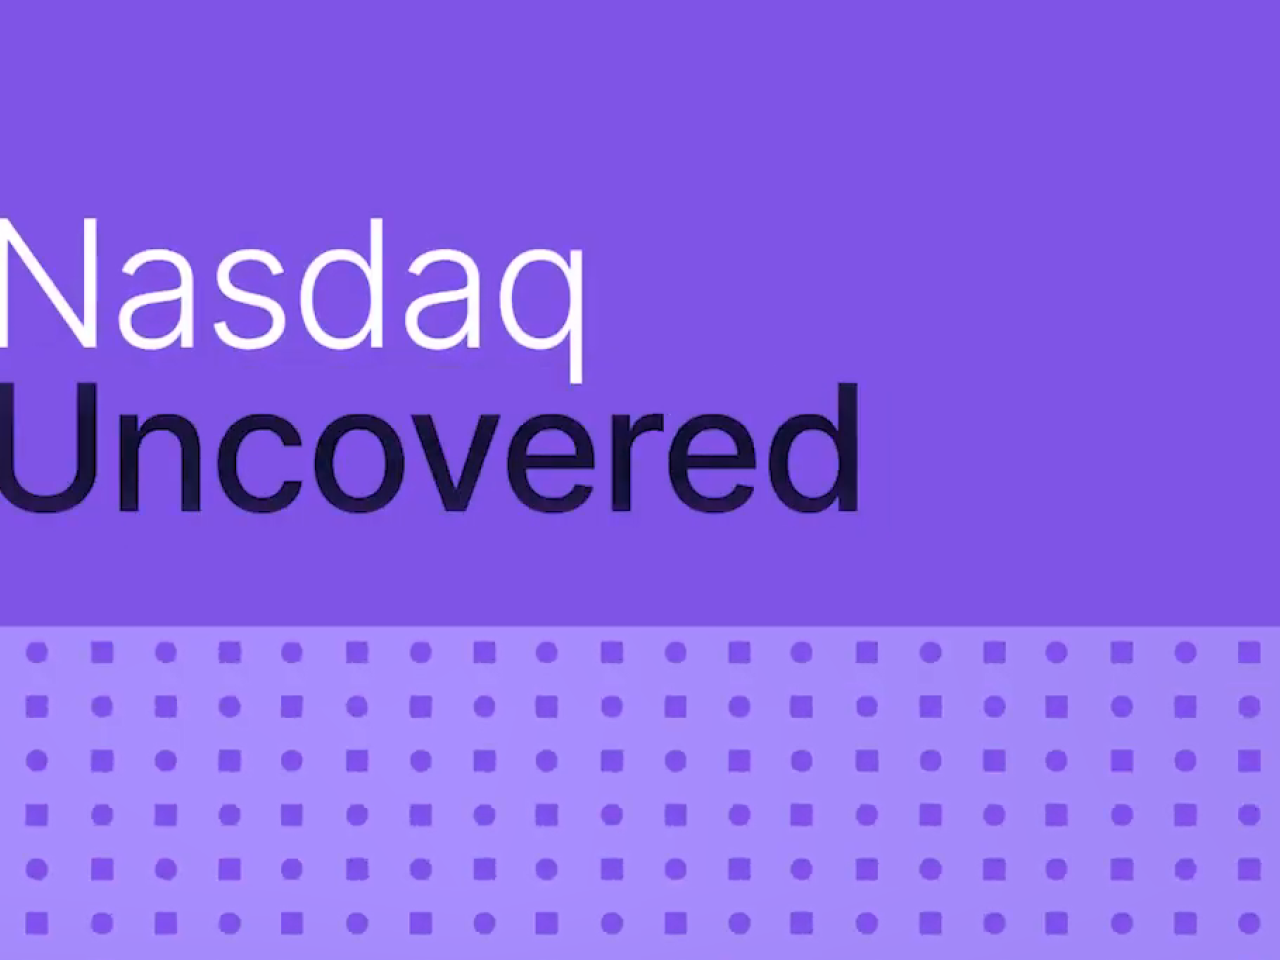 "Nasdaq Uncovered" on a purple background.